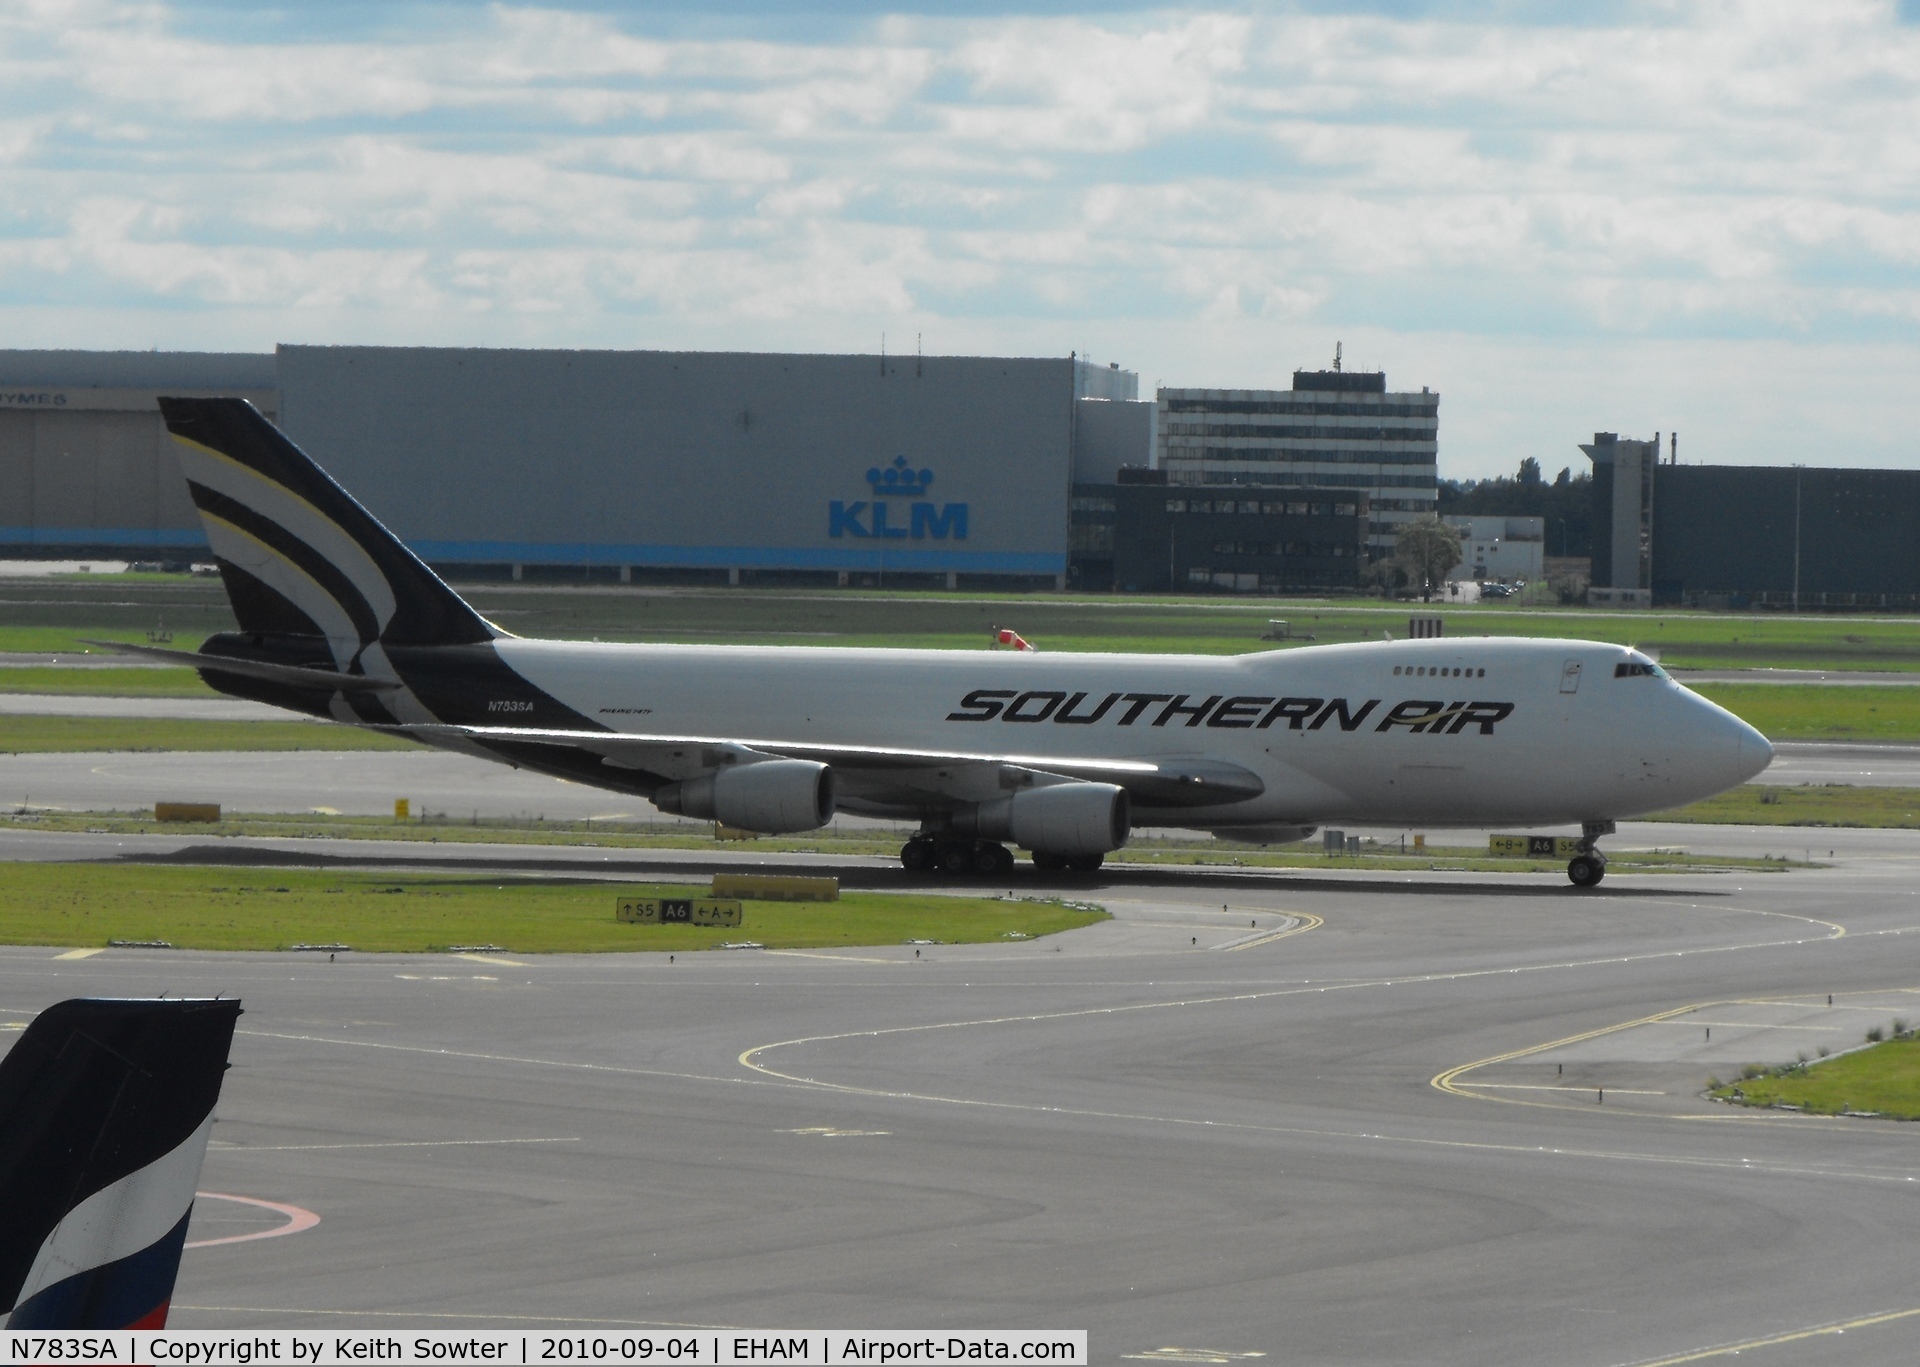 N783SA, 1987 Boeing 747-281F C/N 23919, Taxying for departure